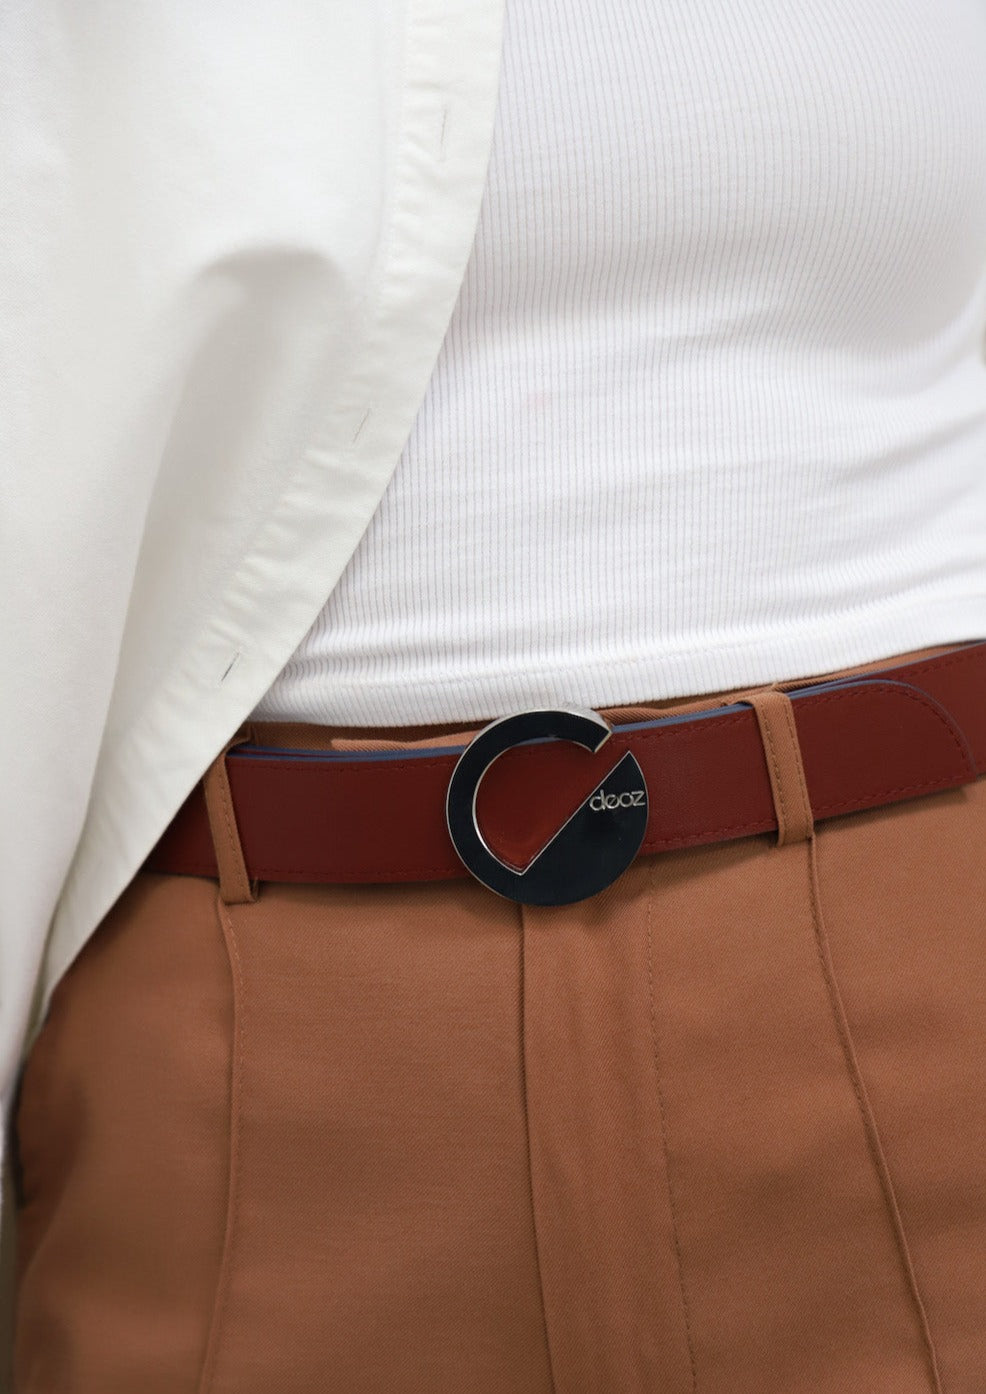 Dooz reversible leather belt detail with silver metal hardware buckle